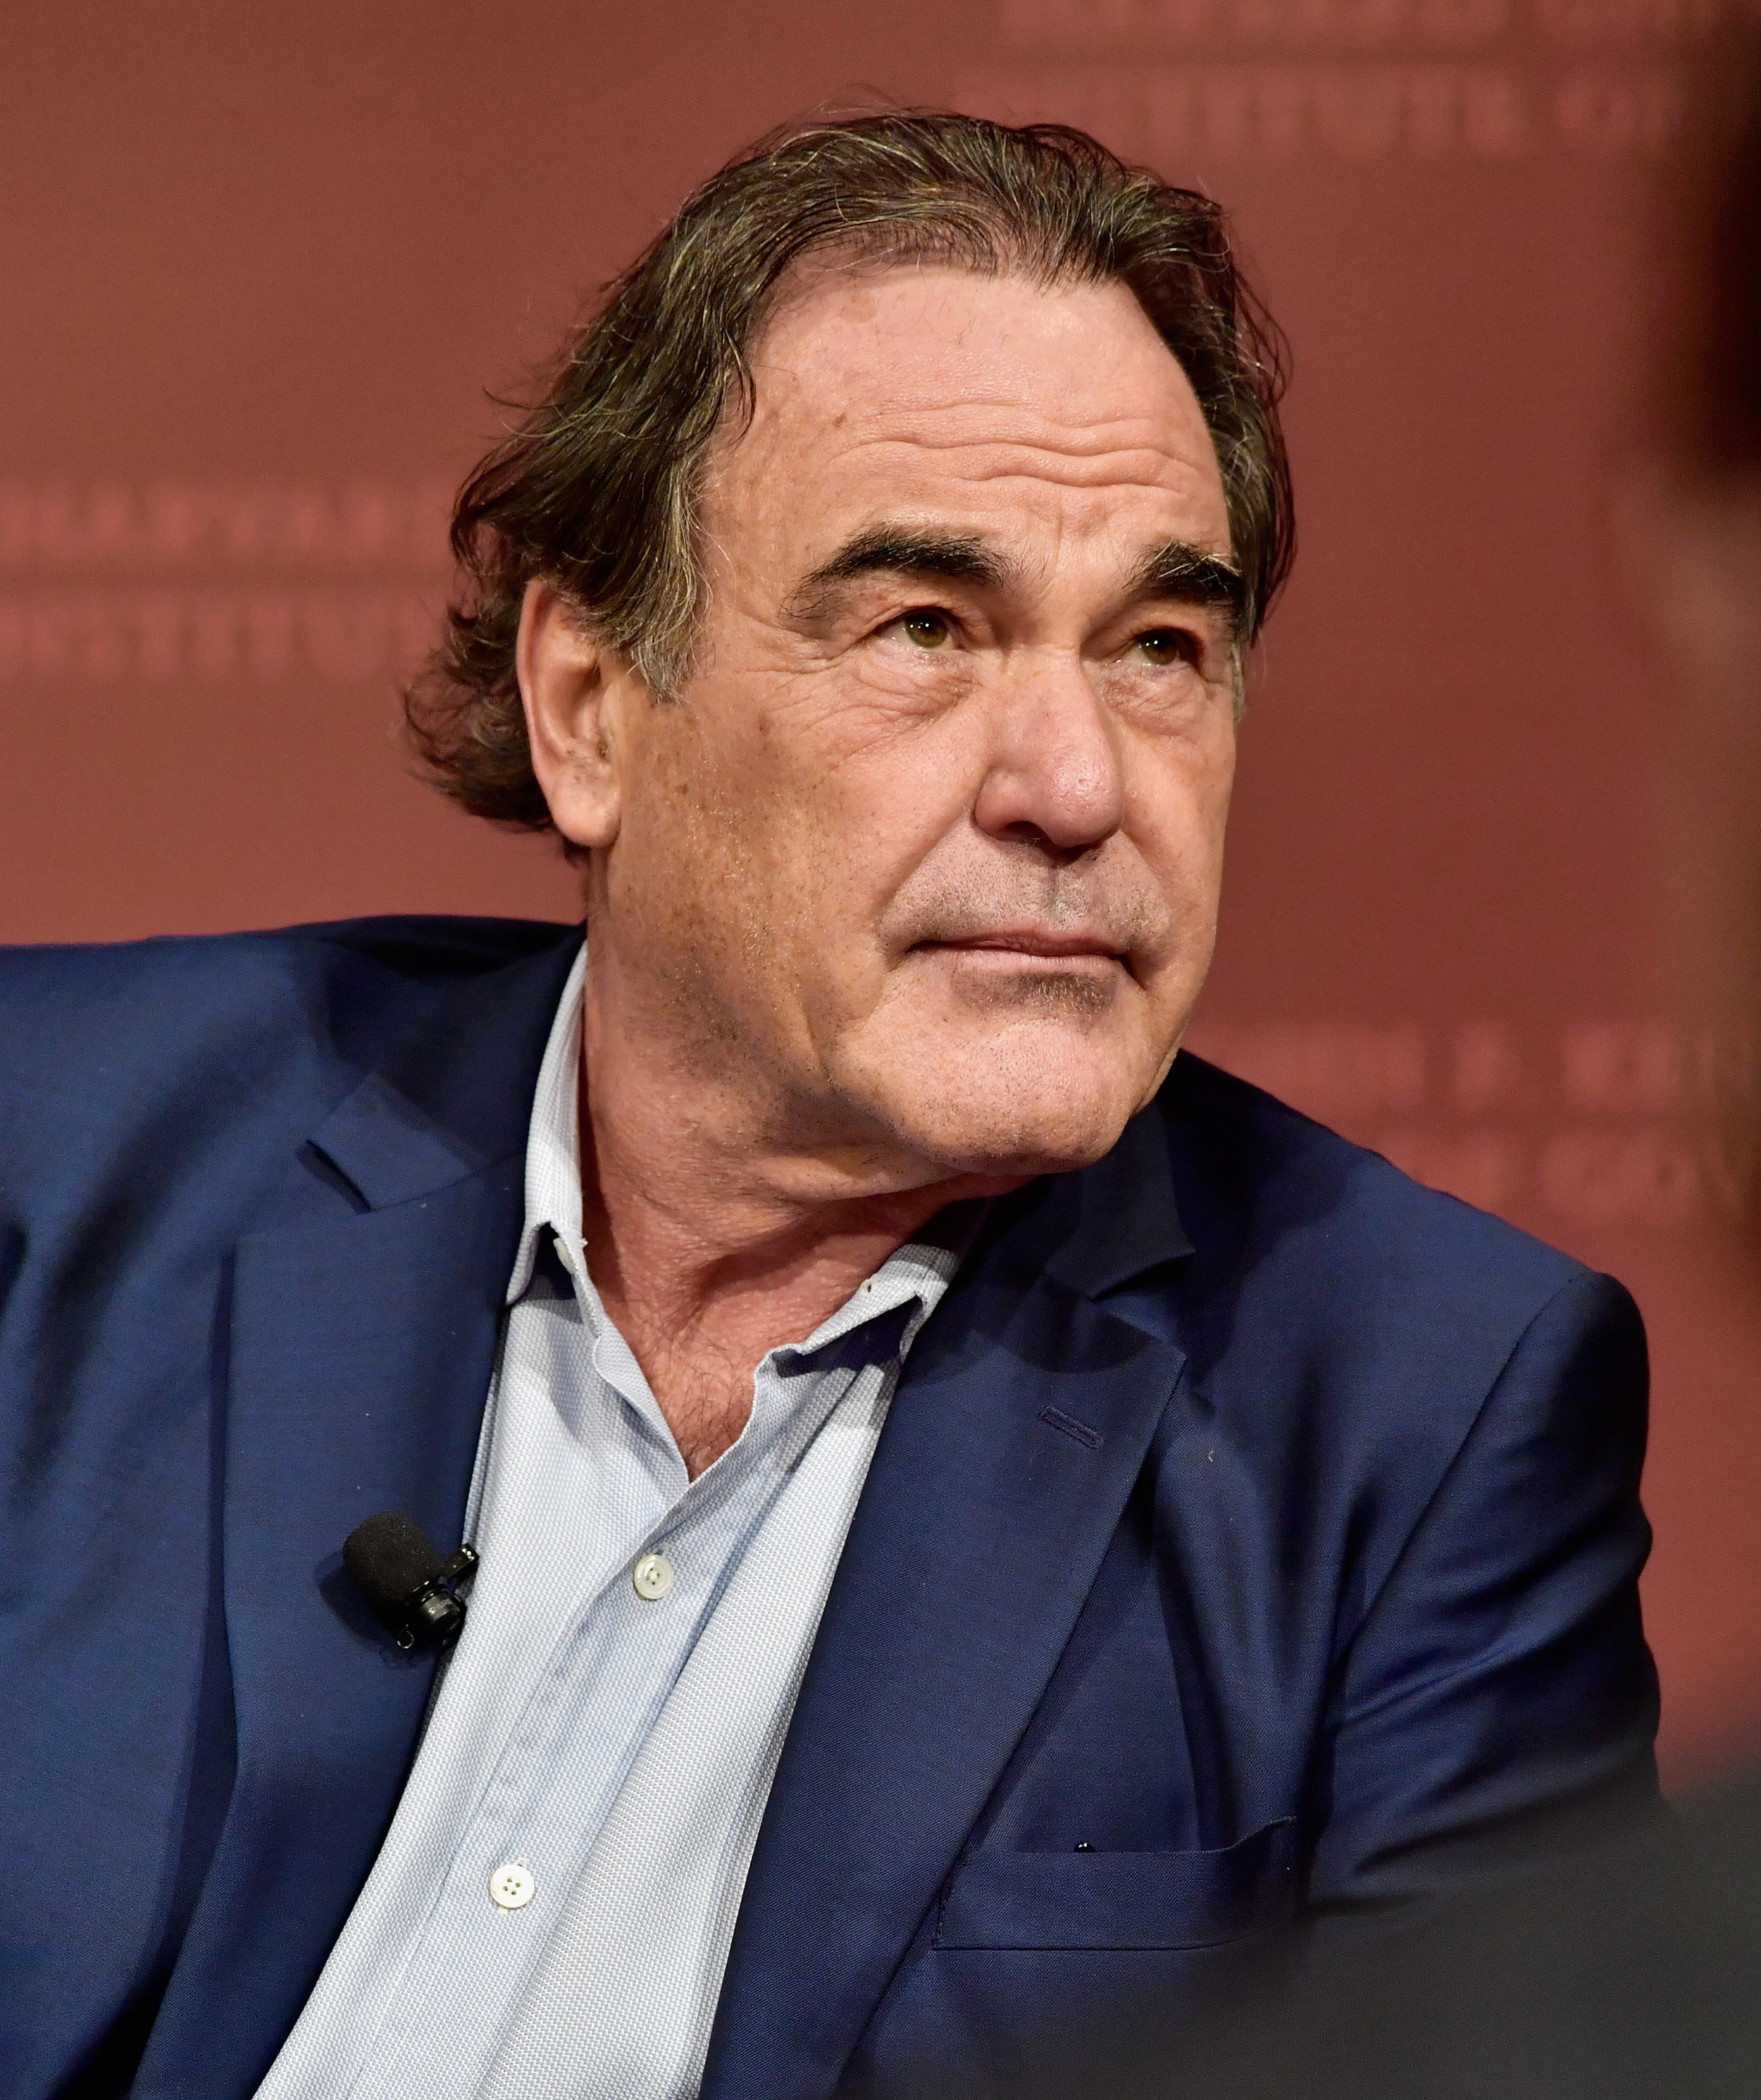 Oliver Stone discusses SNOWDEN at Harvard